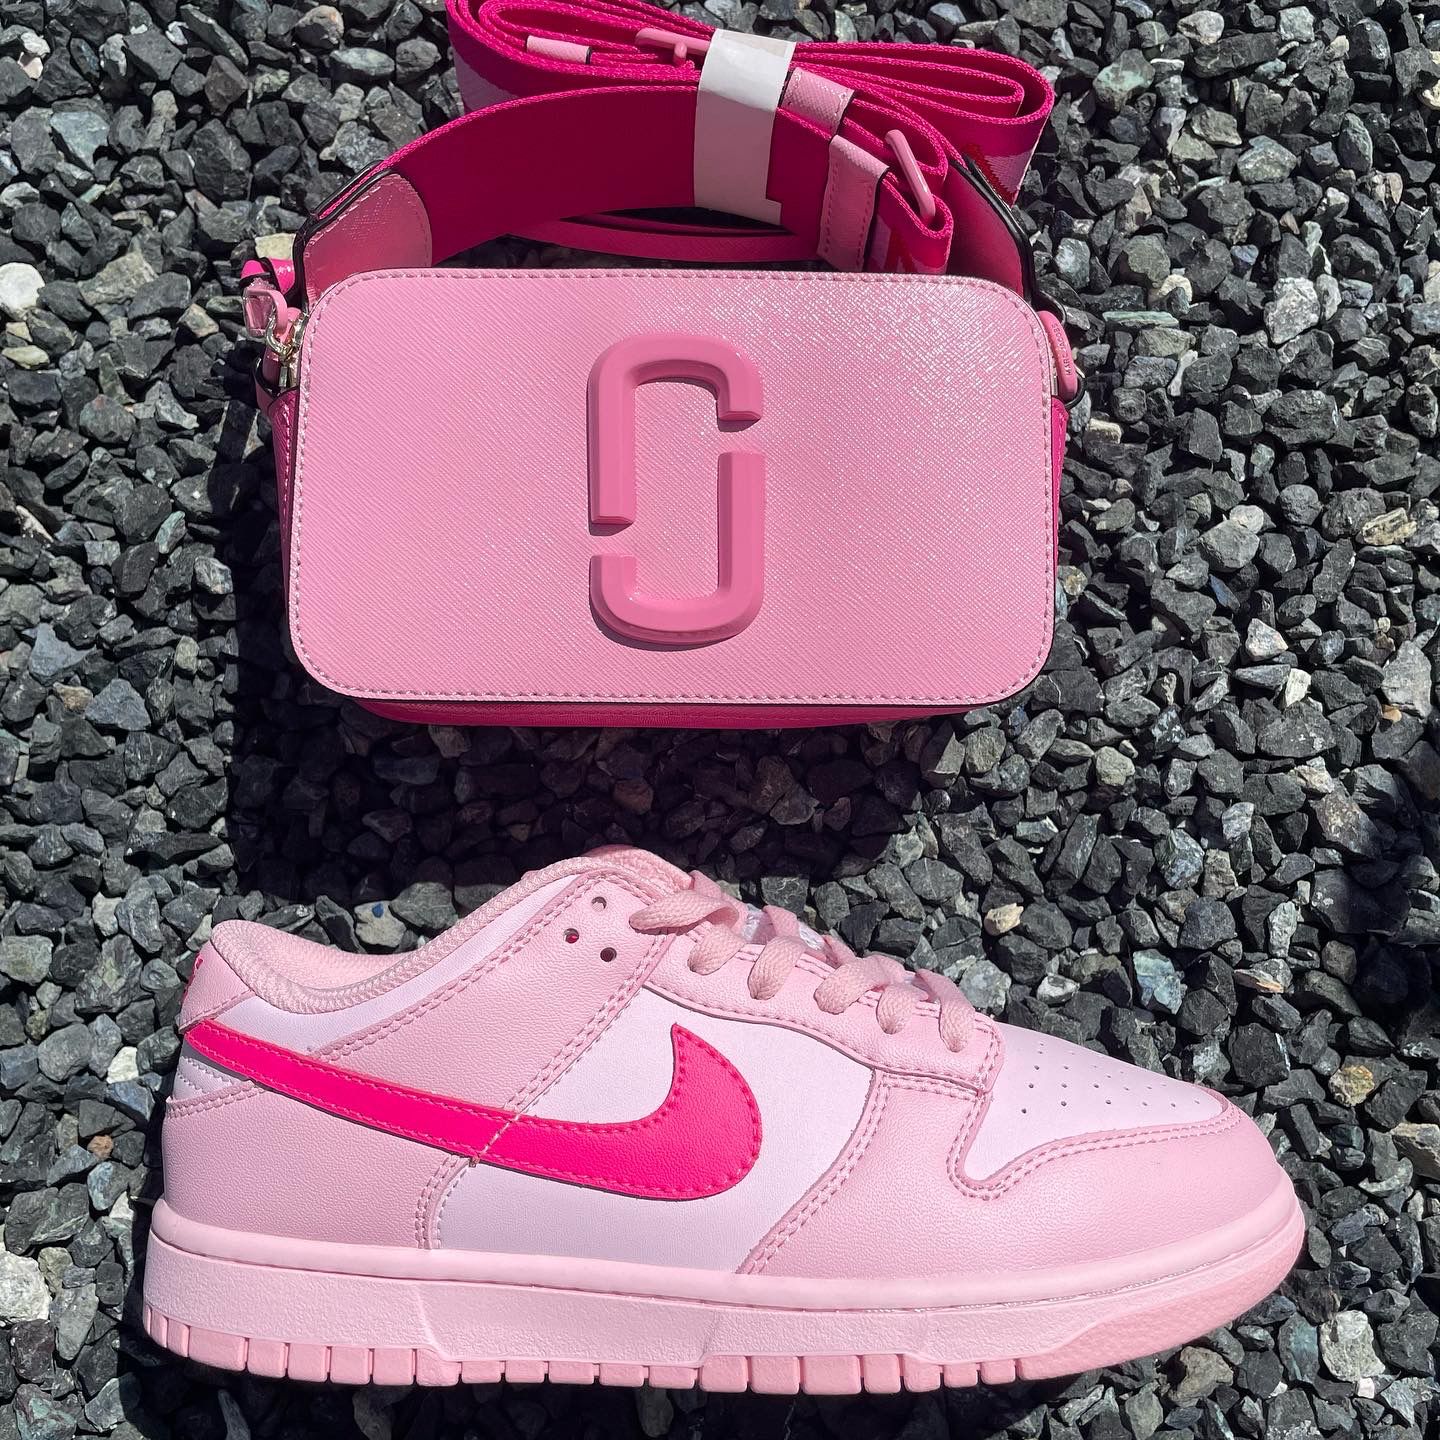 the triple pink marc jacobs purse🩷 - - link in our bio to